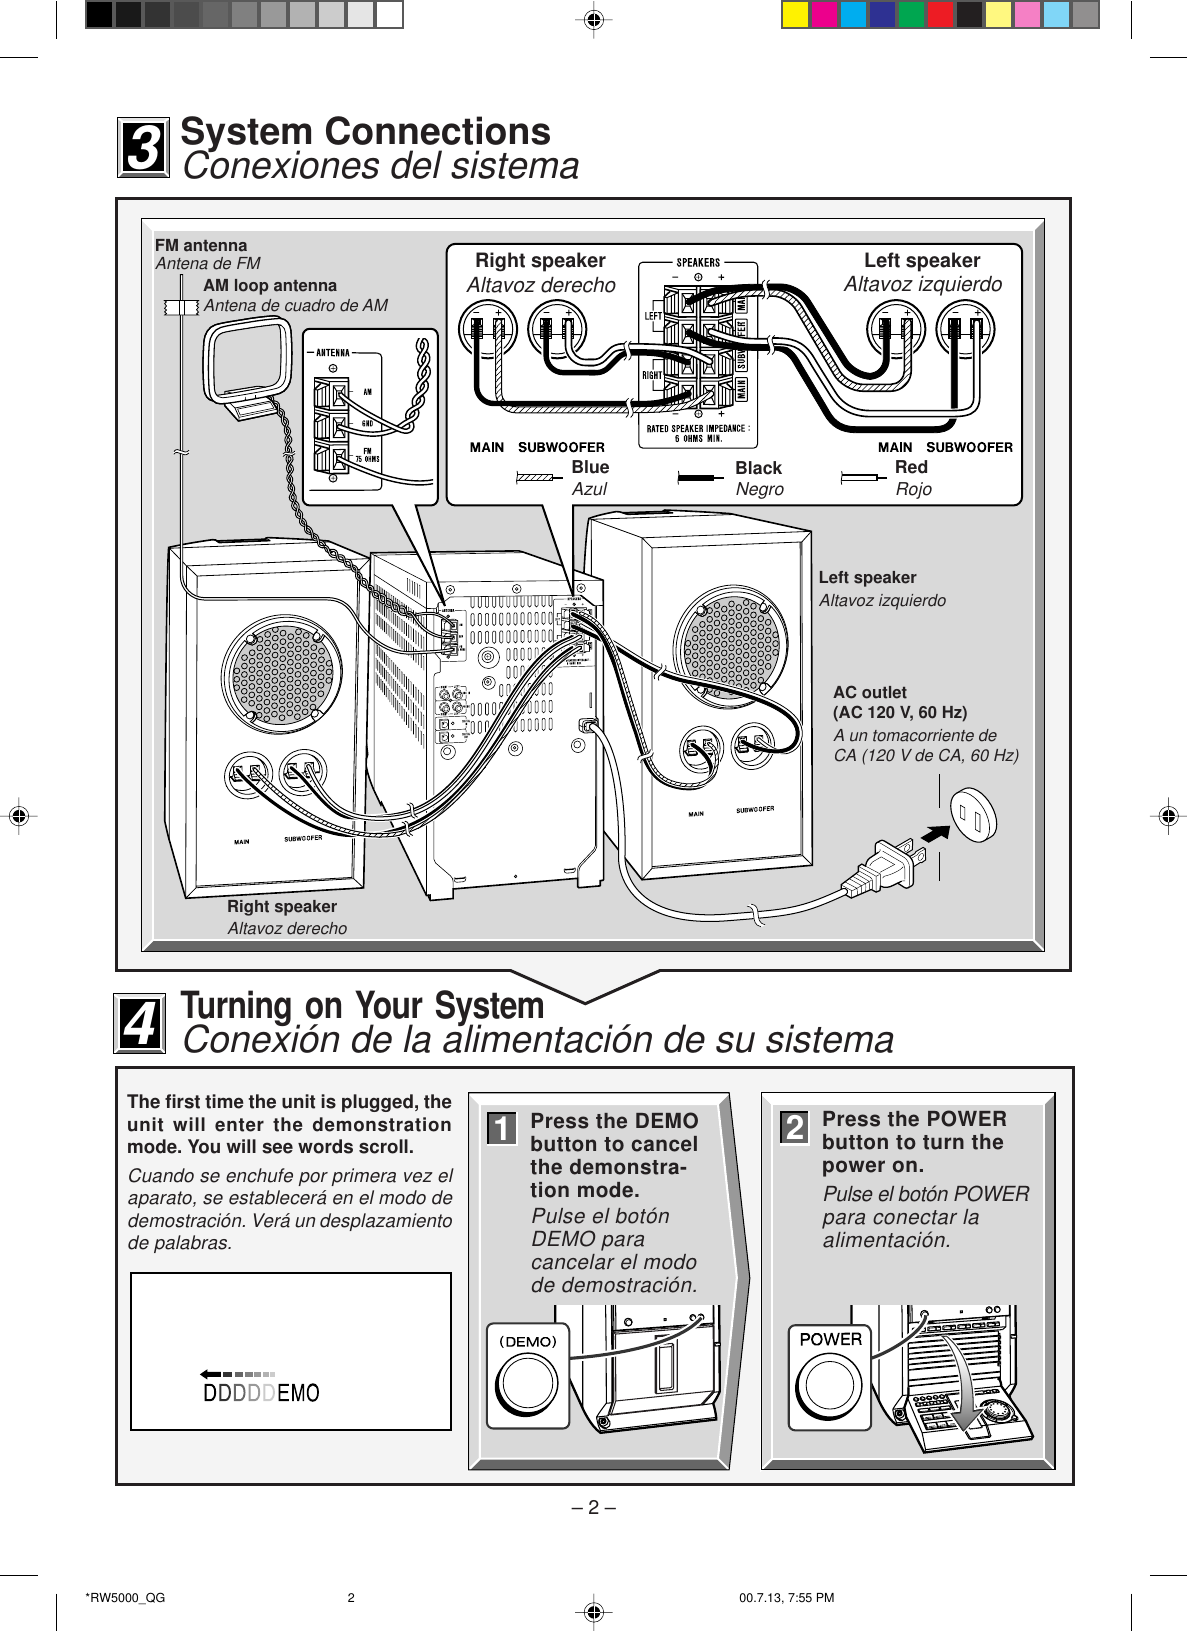 Page 2 of 8 - Sharp Cdrw5000-Quick-Guide CD-RW5000 Quick Start Guide